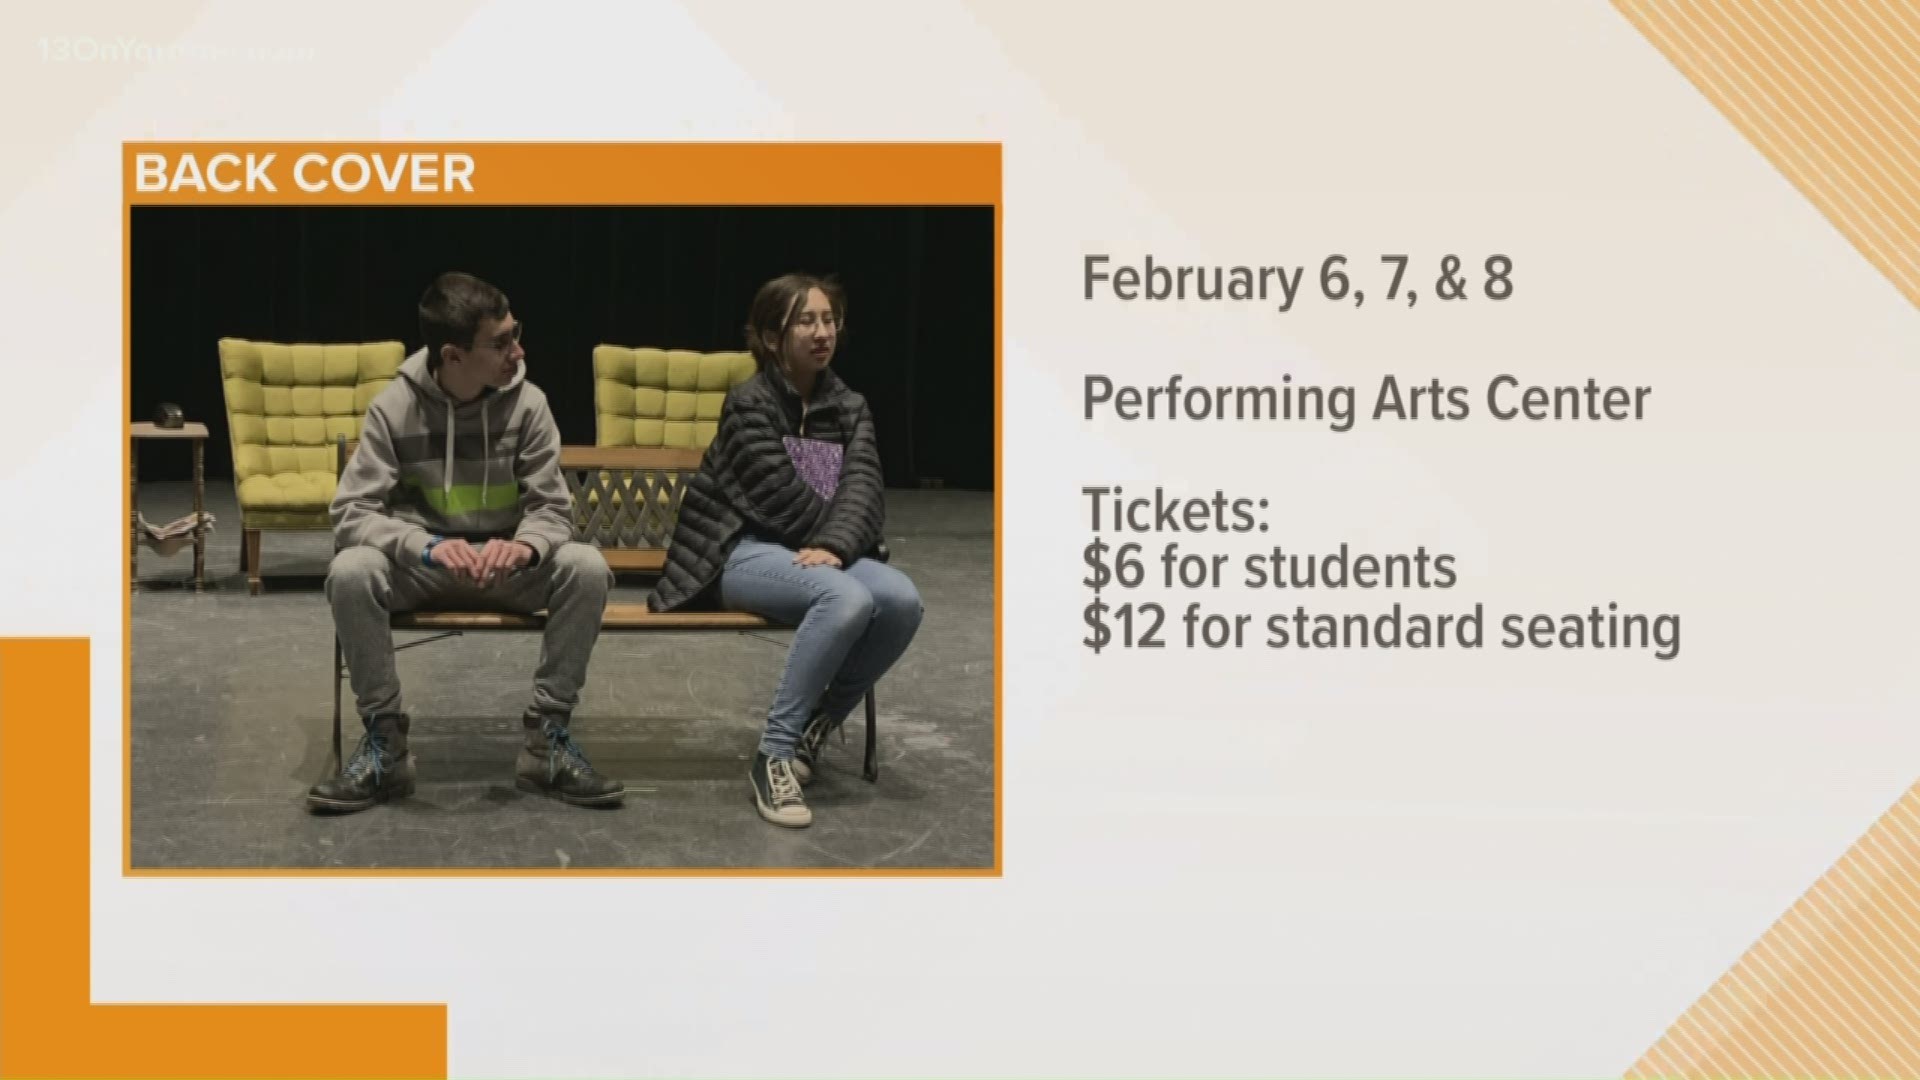 The students of East Grand Rapids High School invite you to their performance of Back Cover.